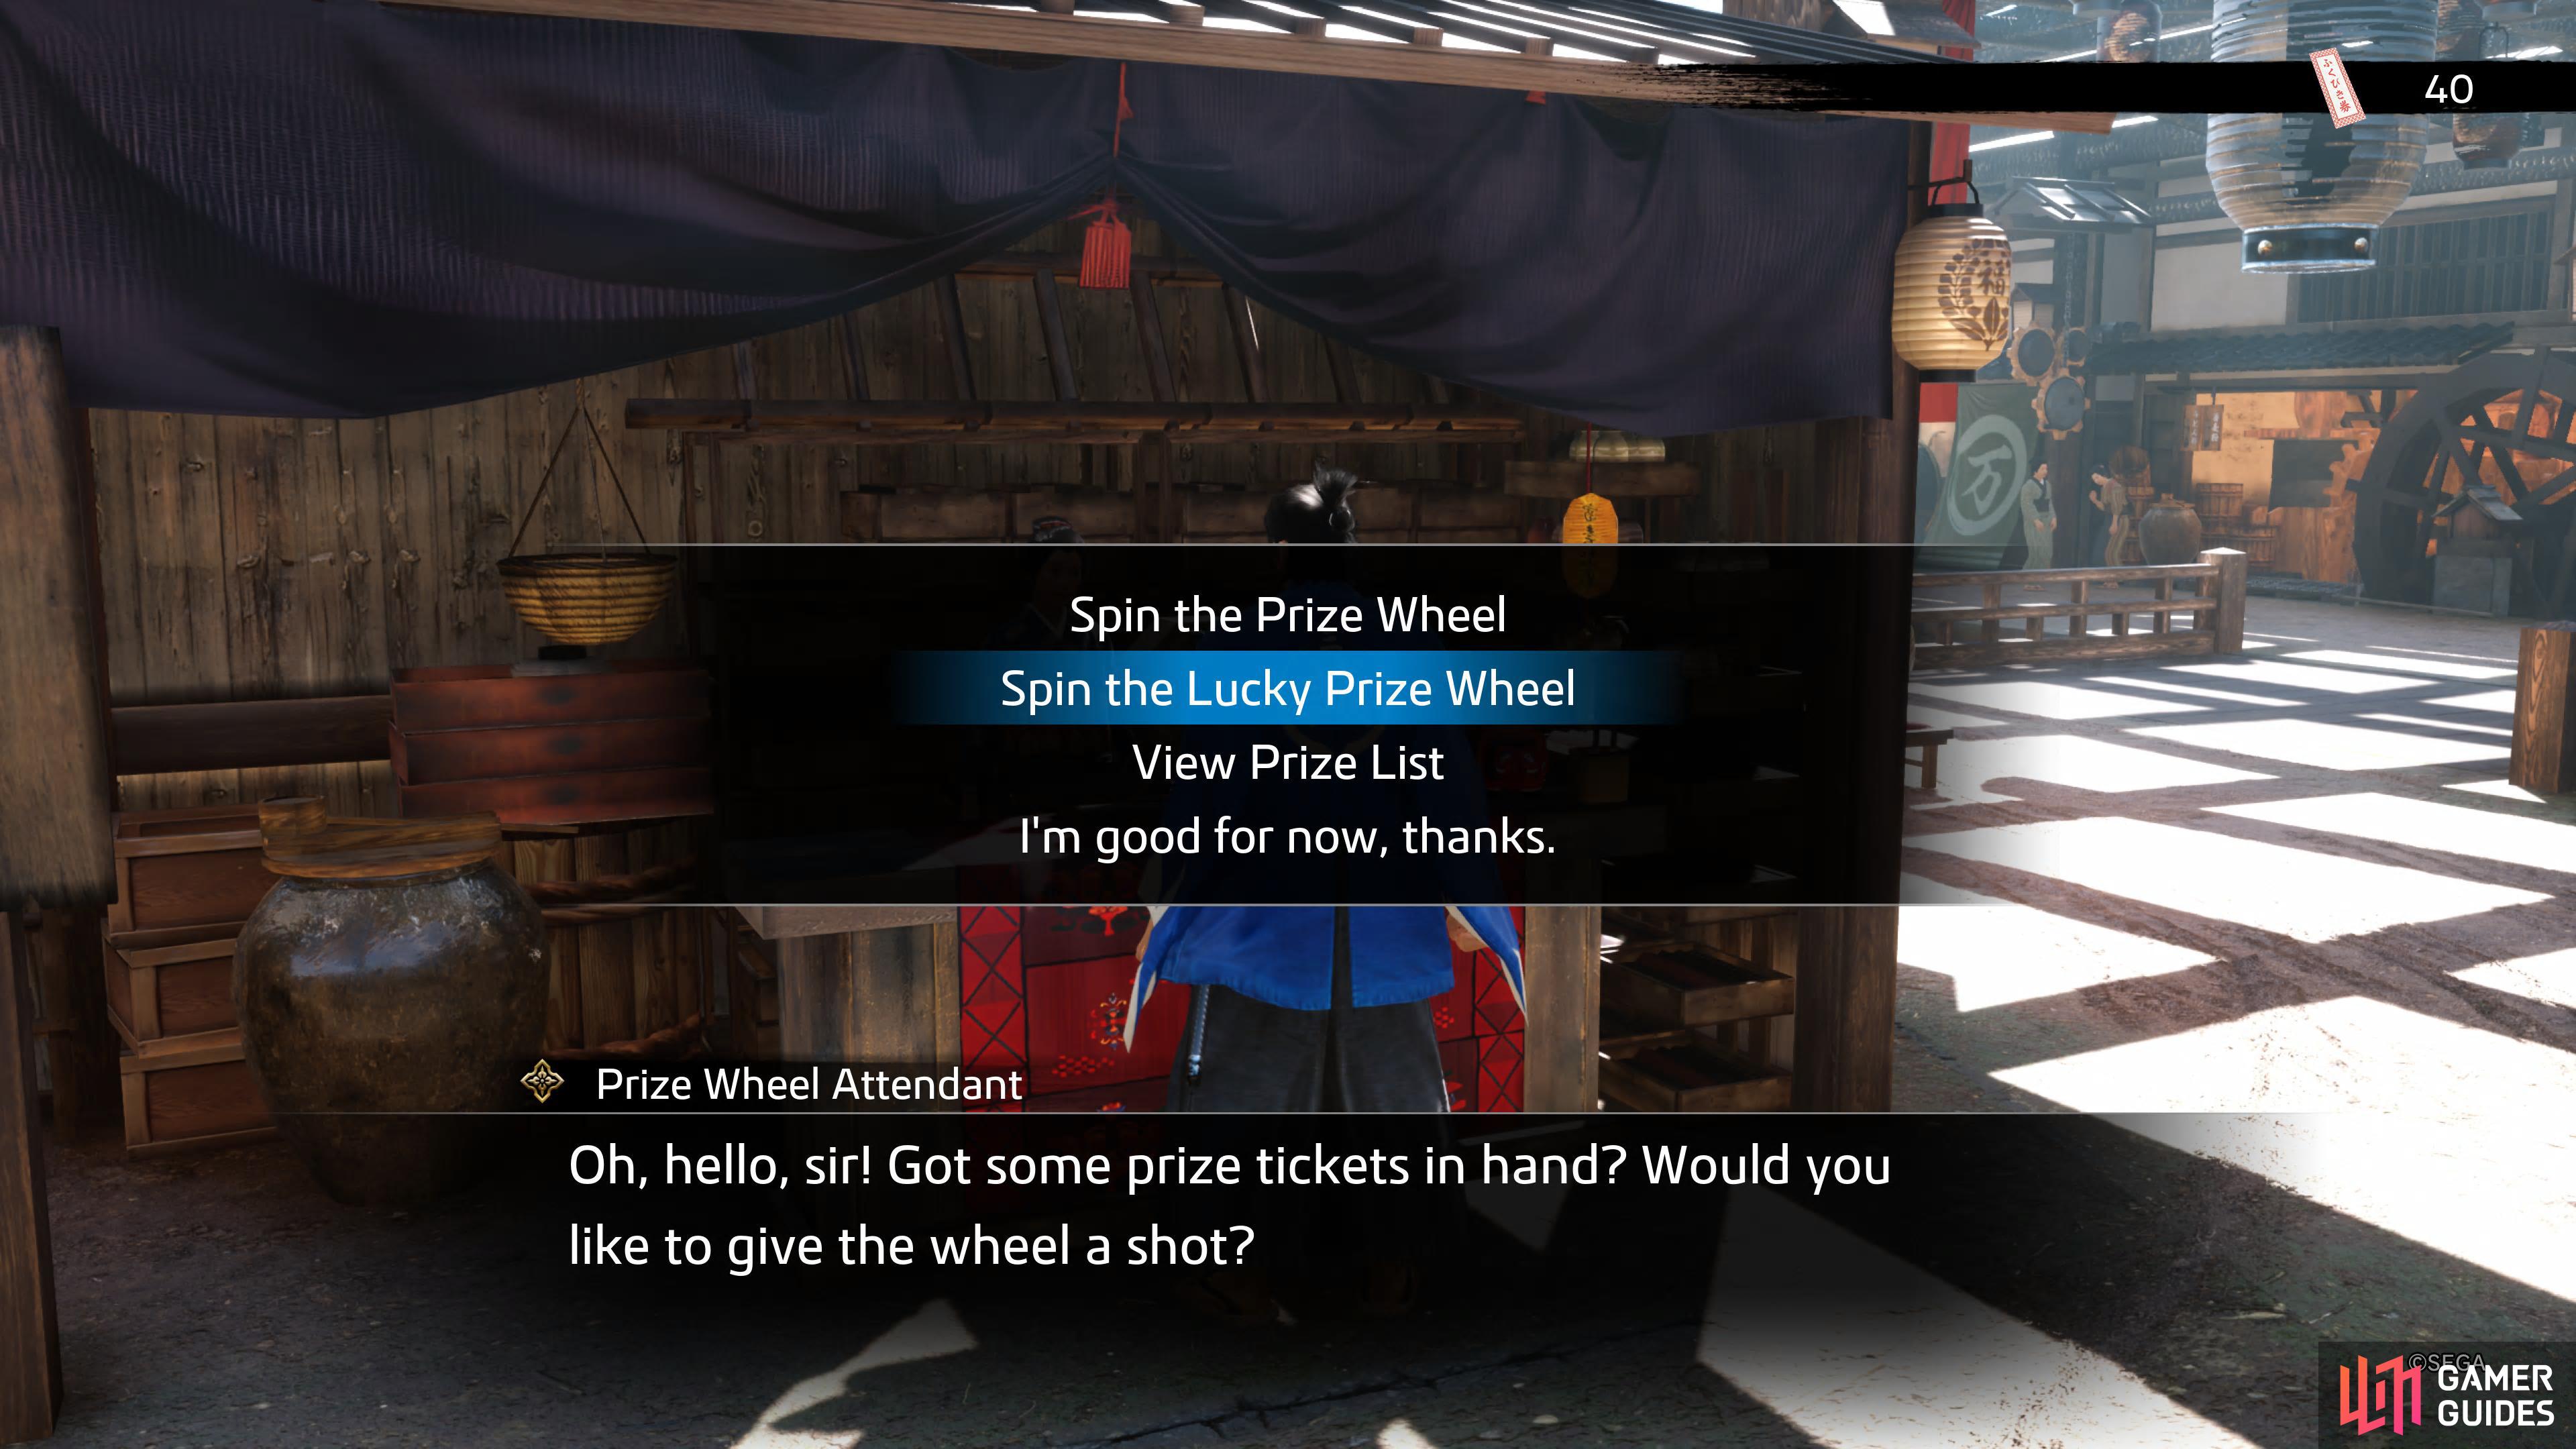 The Regular Lottery Prize Wheel costs 1 ticket to spin the wheel while the Lucky Prize Wheel will cost you double.